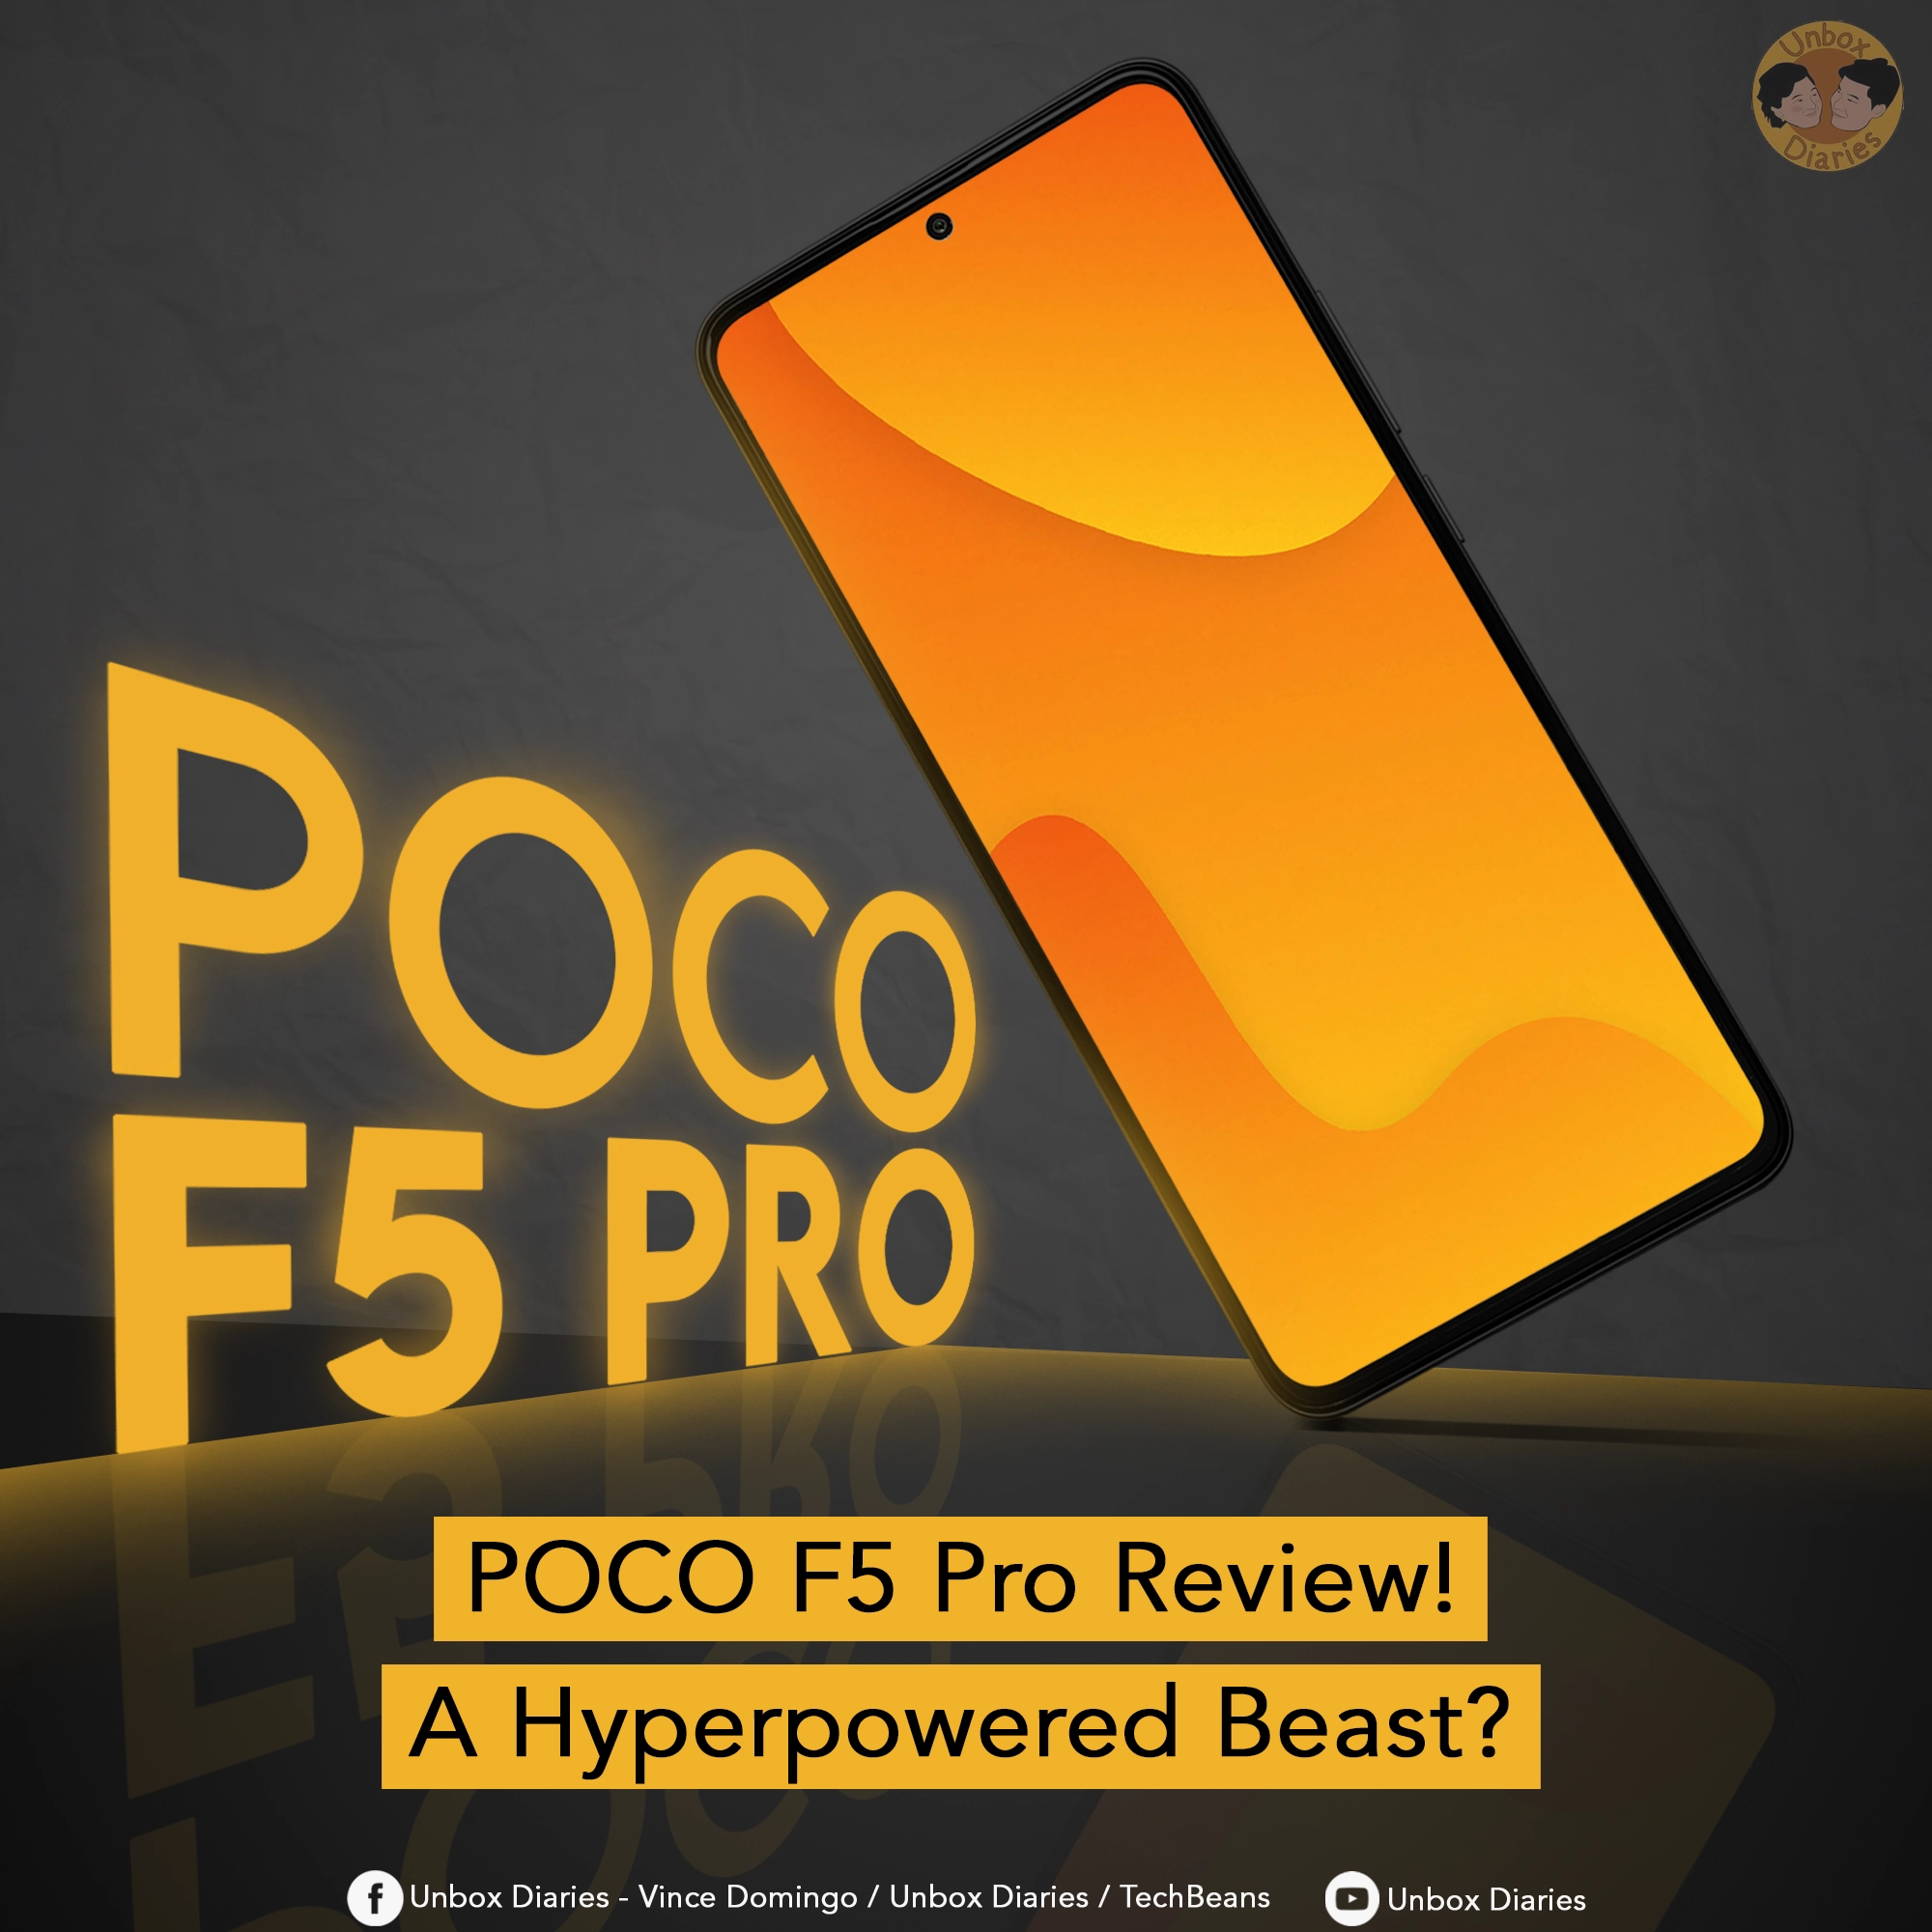 POCO F5 Pro Review! - A Hyperpowered Beast? - Unbox Diaries